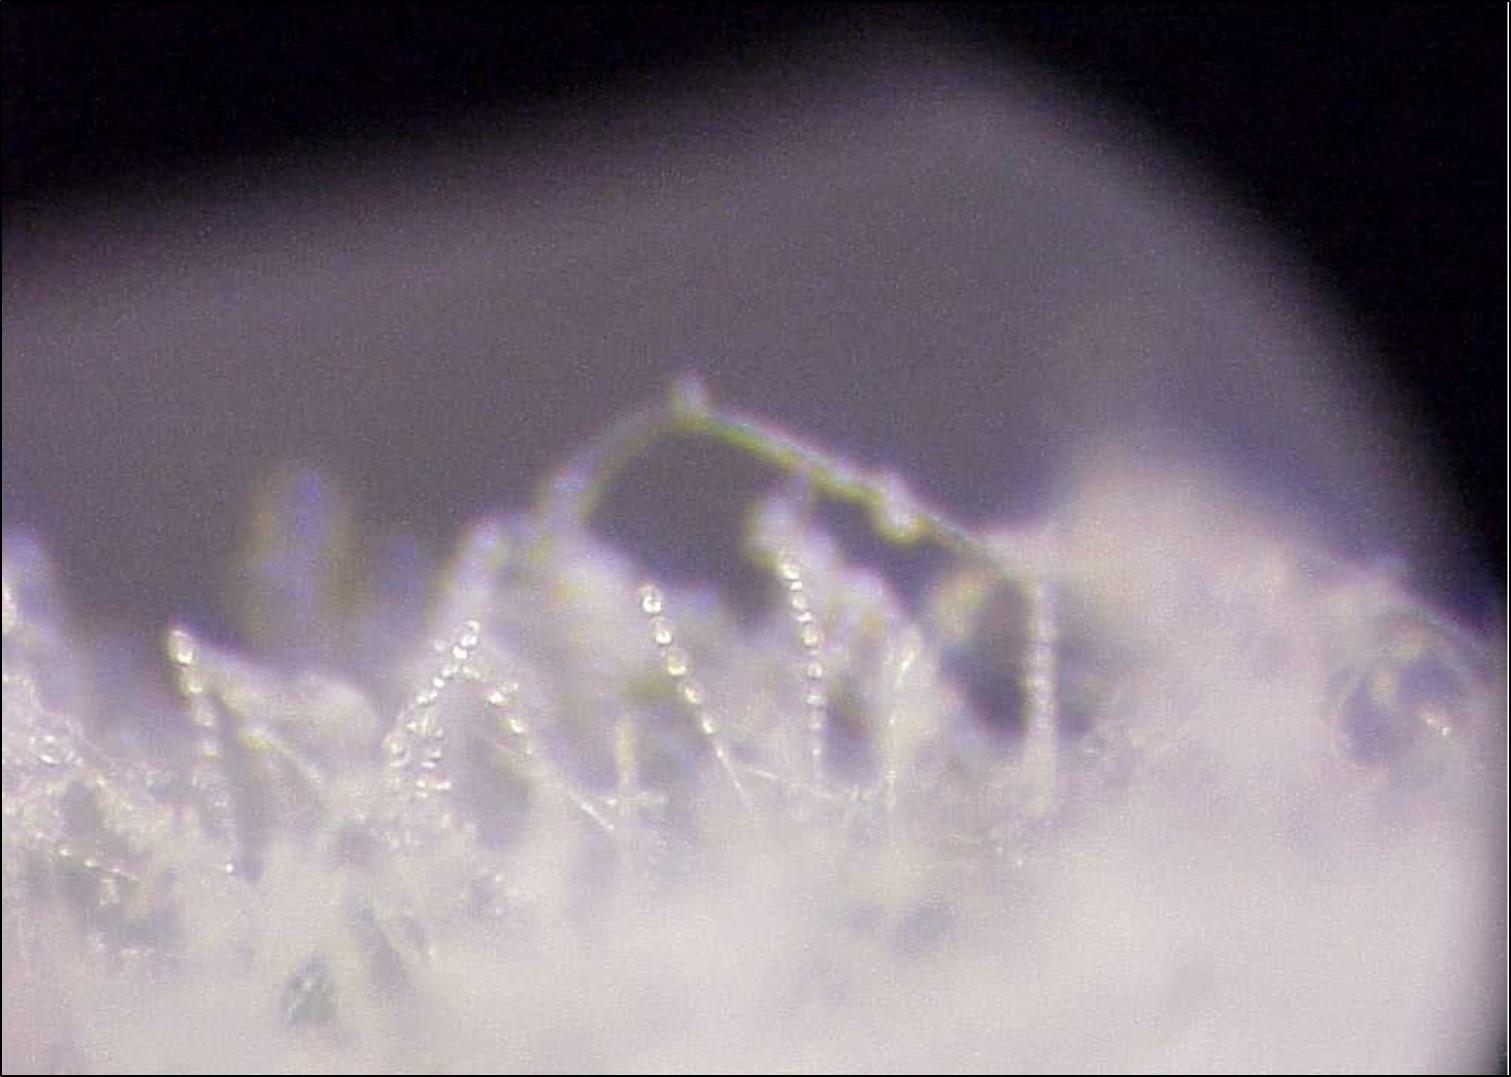 An image captured through a microscope shows the strand-like structures of conidia-produced Podosphaera macularis on a hemp leaf.